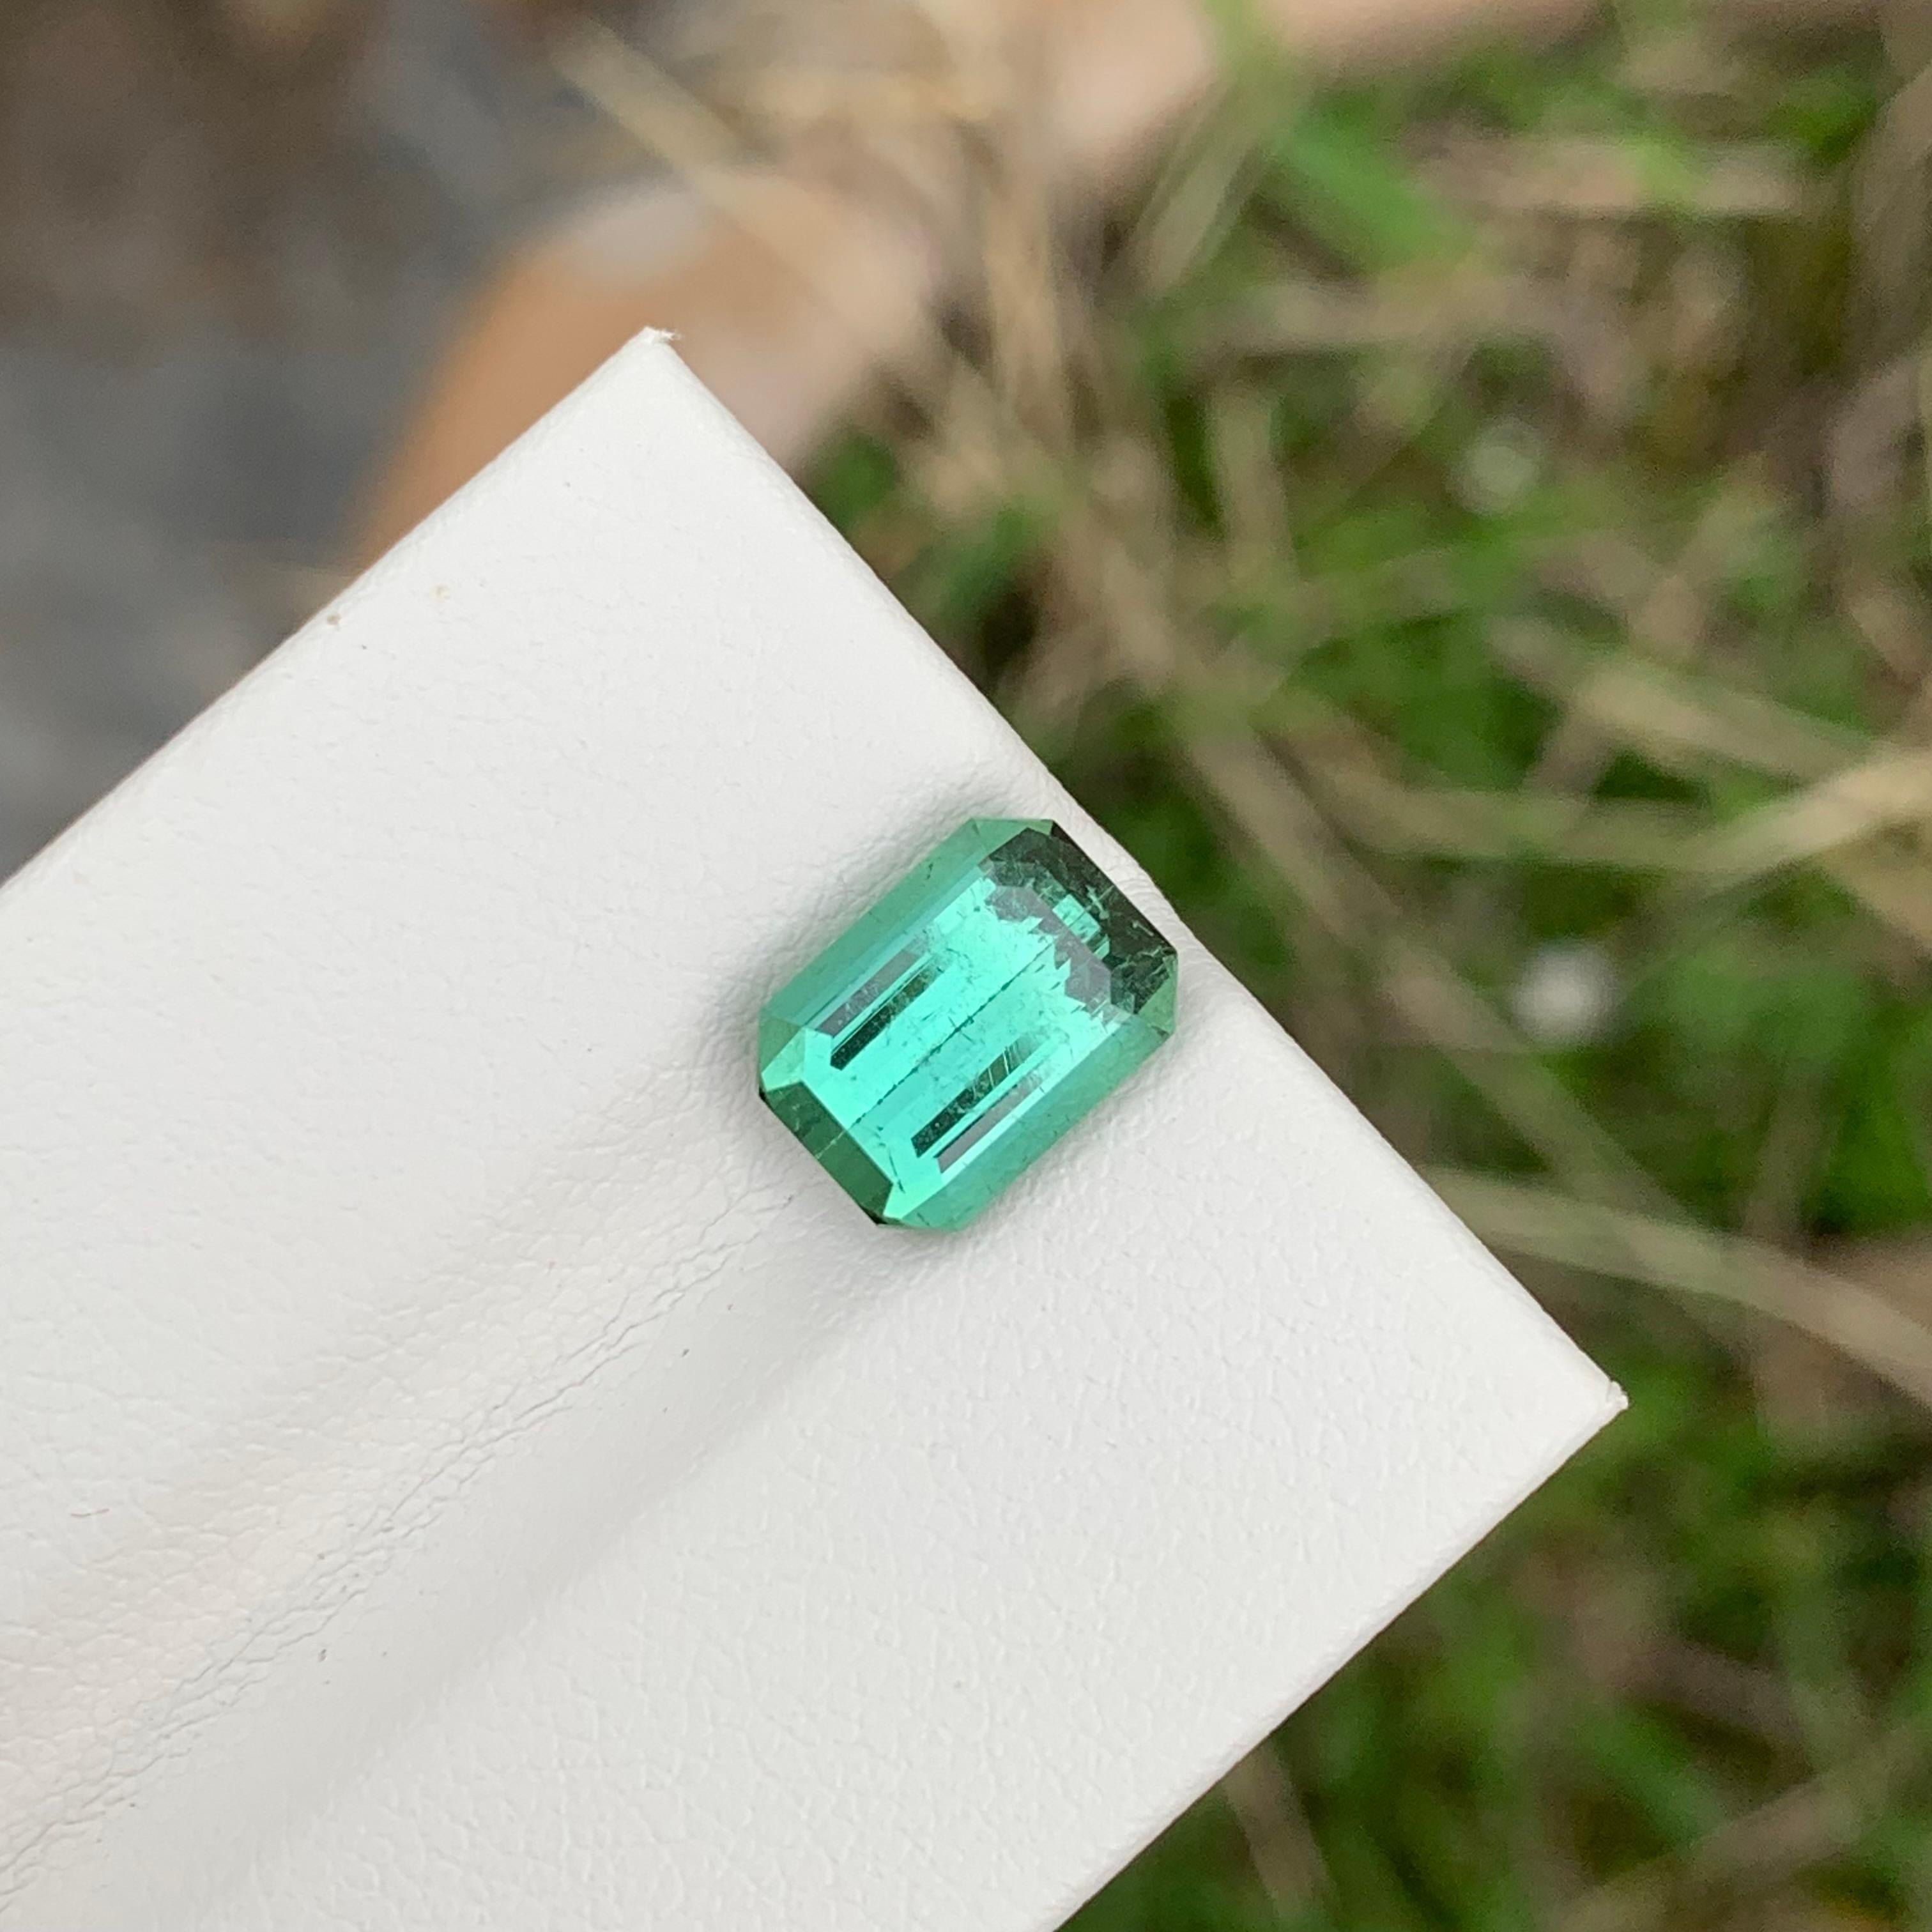 Loose Mint Green Tourmaline

Weight: 3.10 Carats
Dimension: 9.3 x 6.8 x 5.2 Mm
Colour: Mint Green 
Origin: Afghanistan
Certificate: On Demand
Treatment: Non

Tourmaline is a captivating gemstone known for its remarkable variety of colors, making it